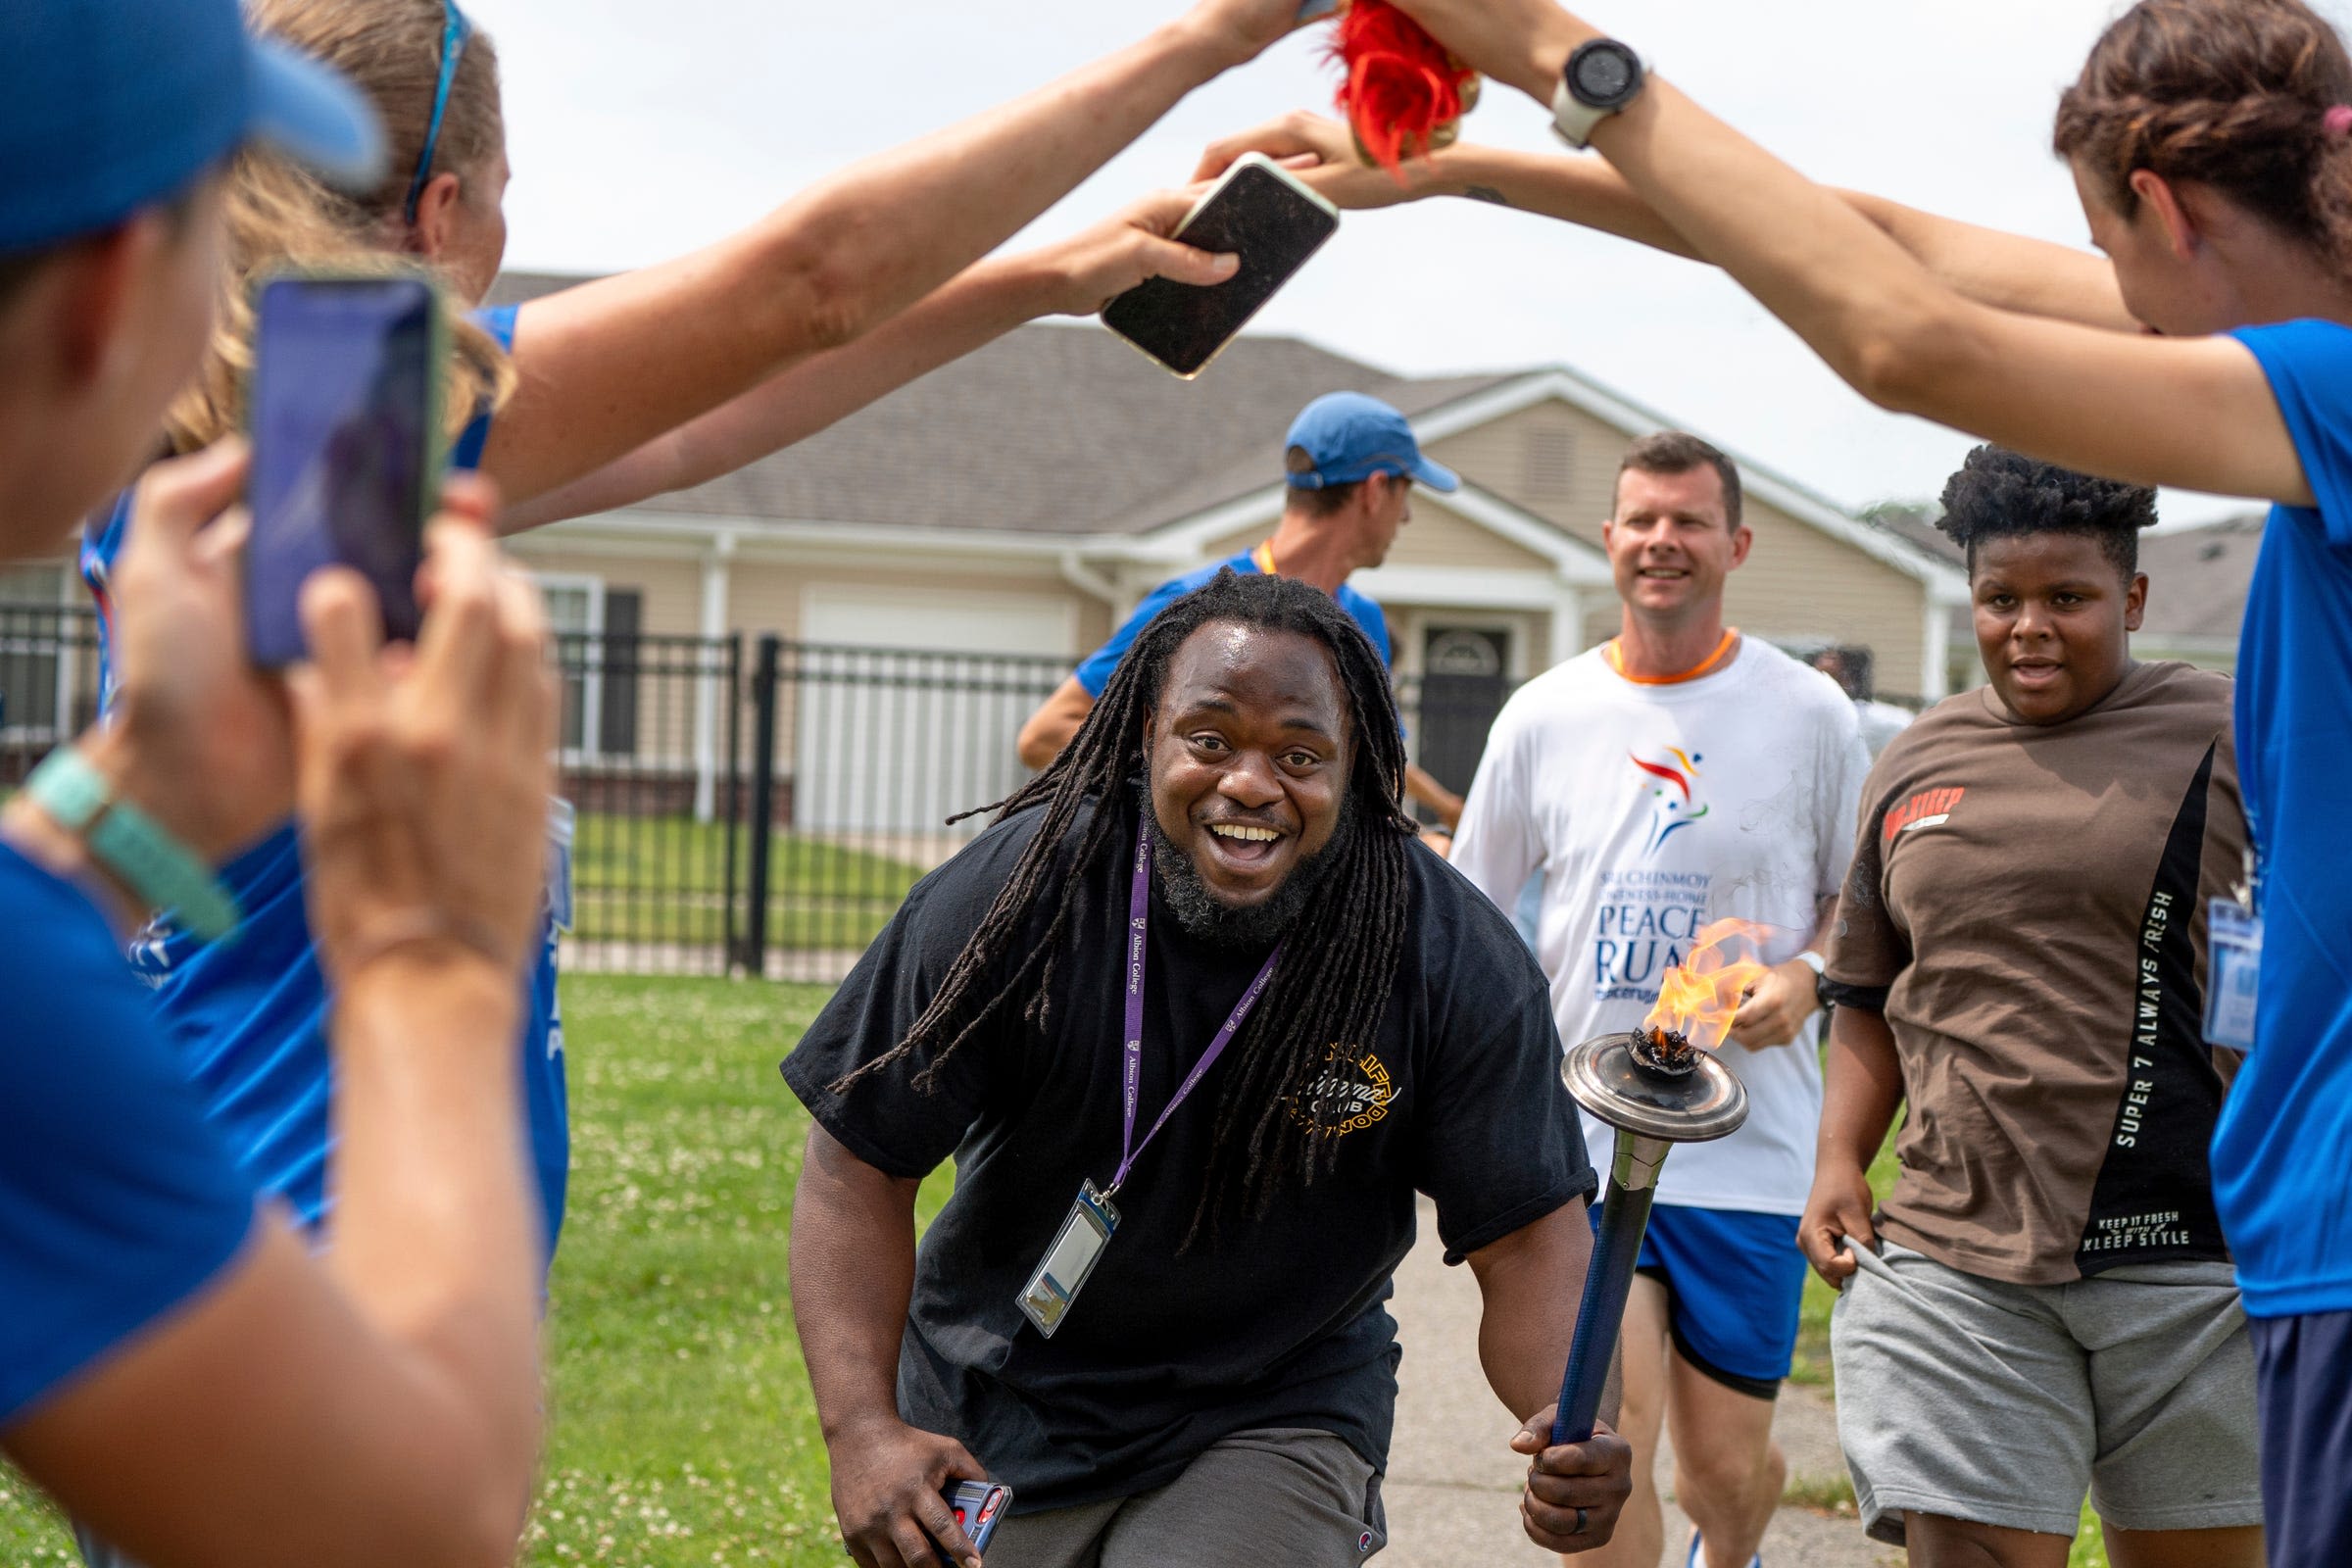 'It fills you with hope for humanity': International torch relay runners stop in Detroit